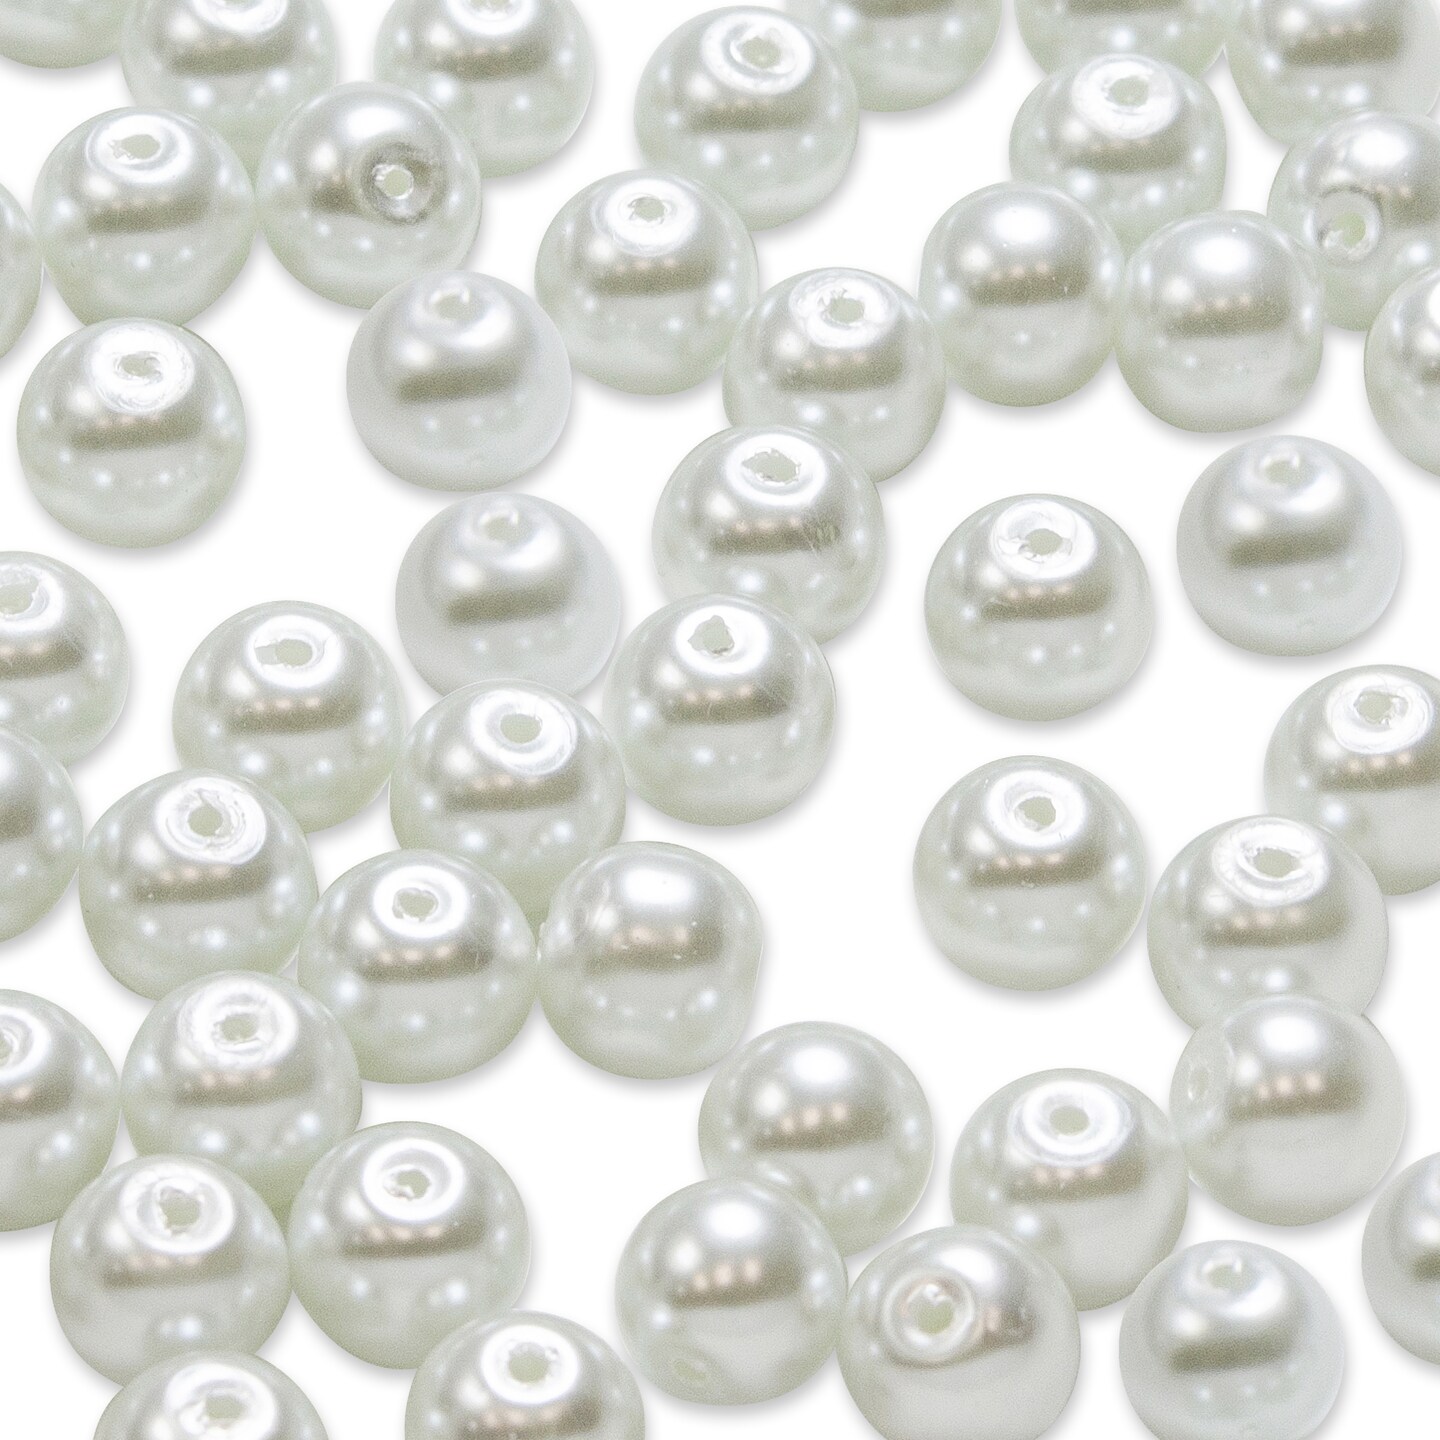 10mm Ivory Glass Pearl Beads - 80 on 30-Inch Strand